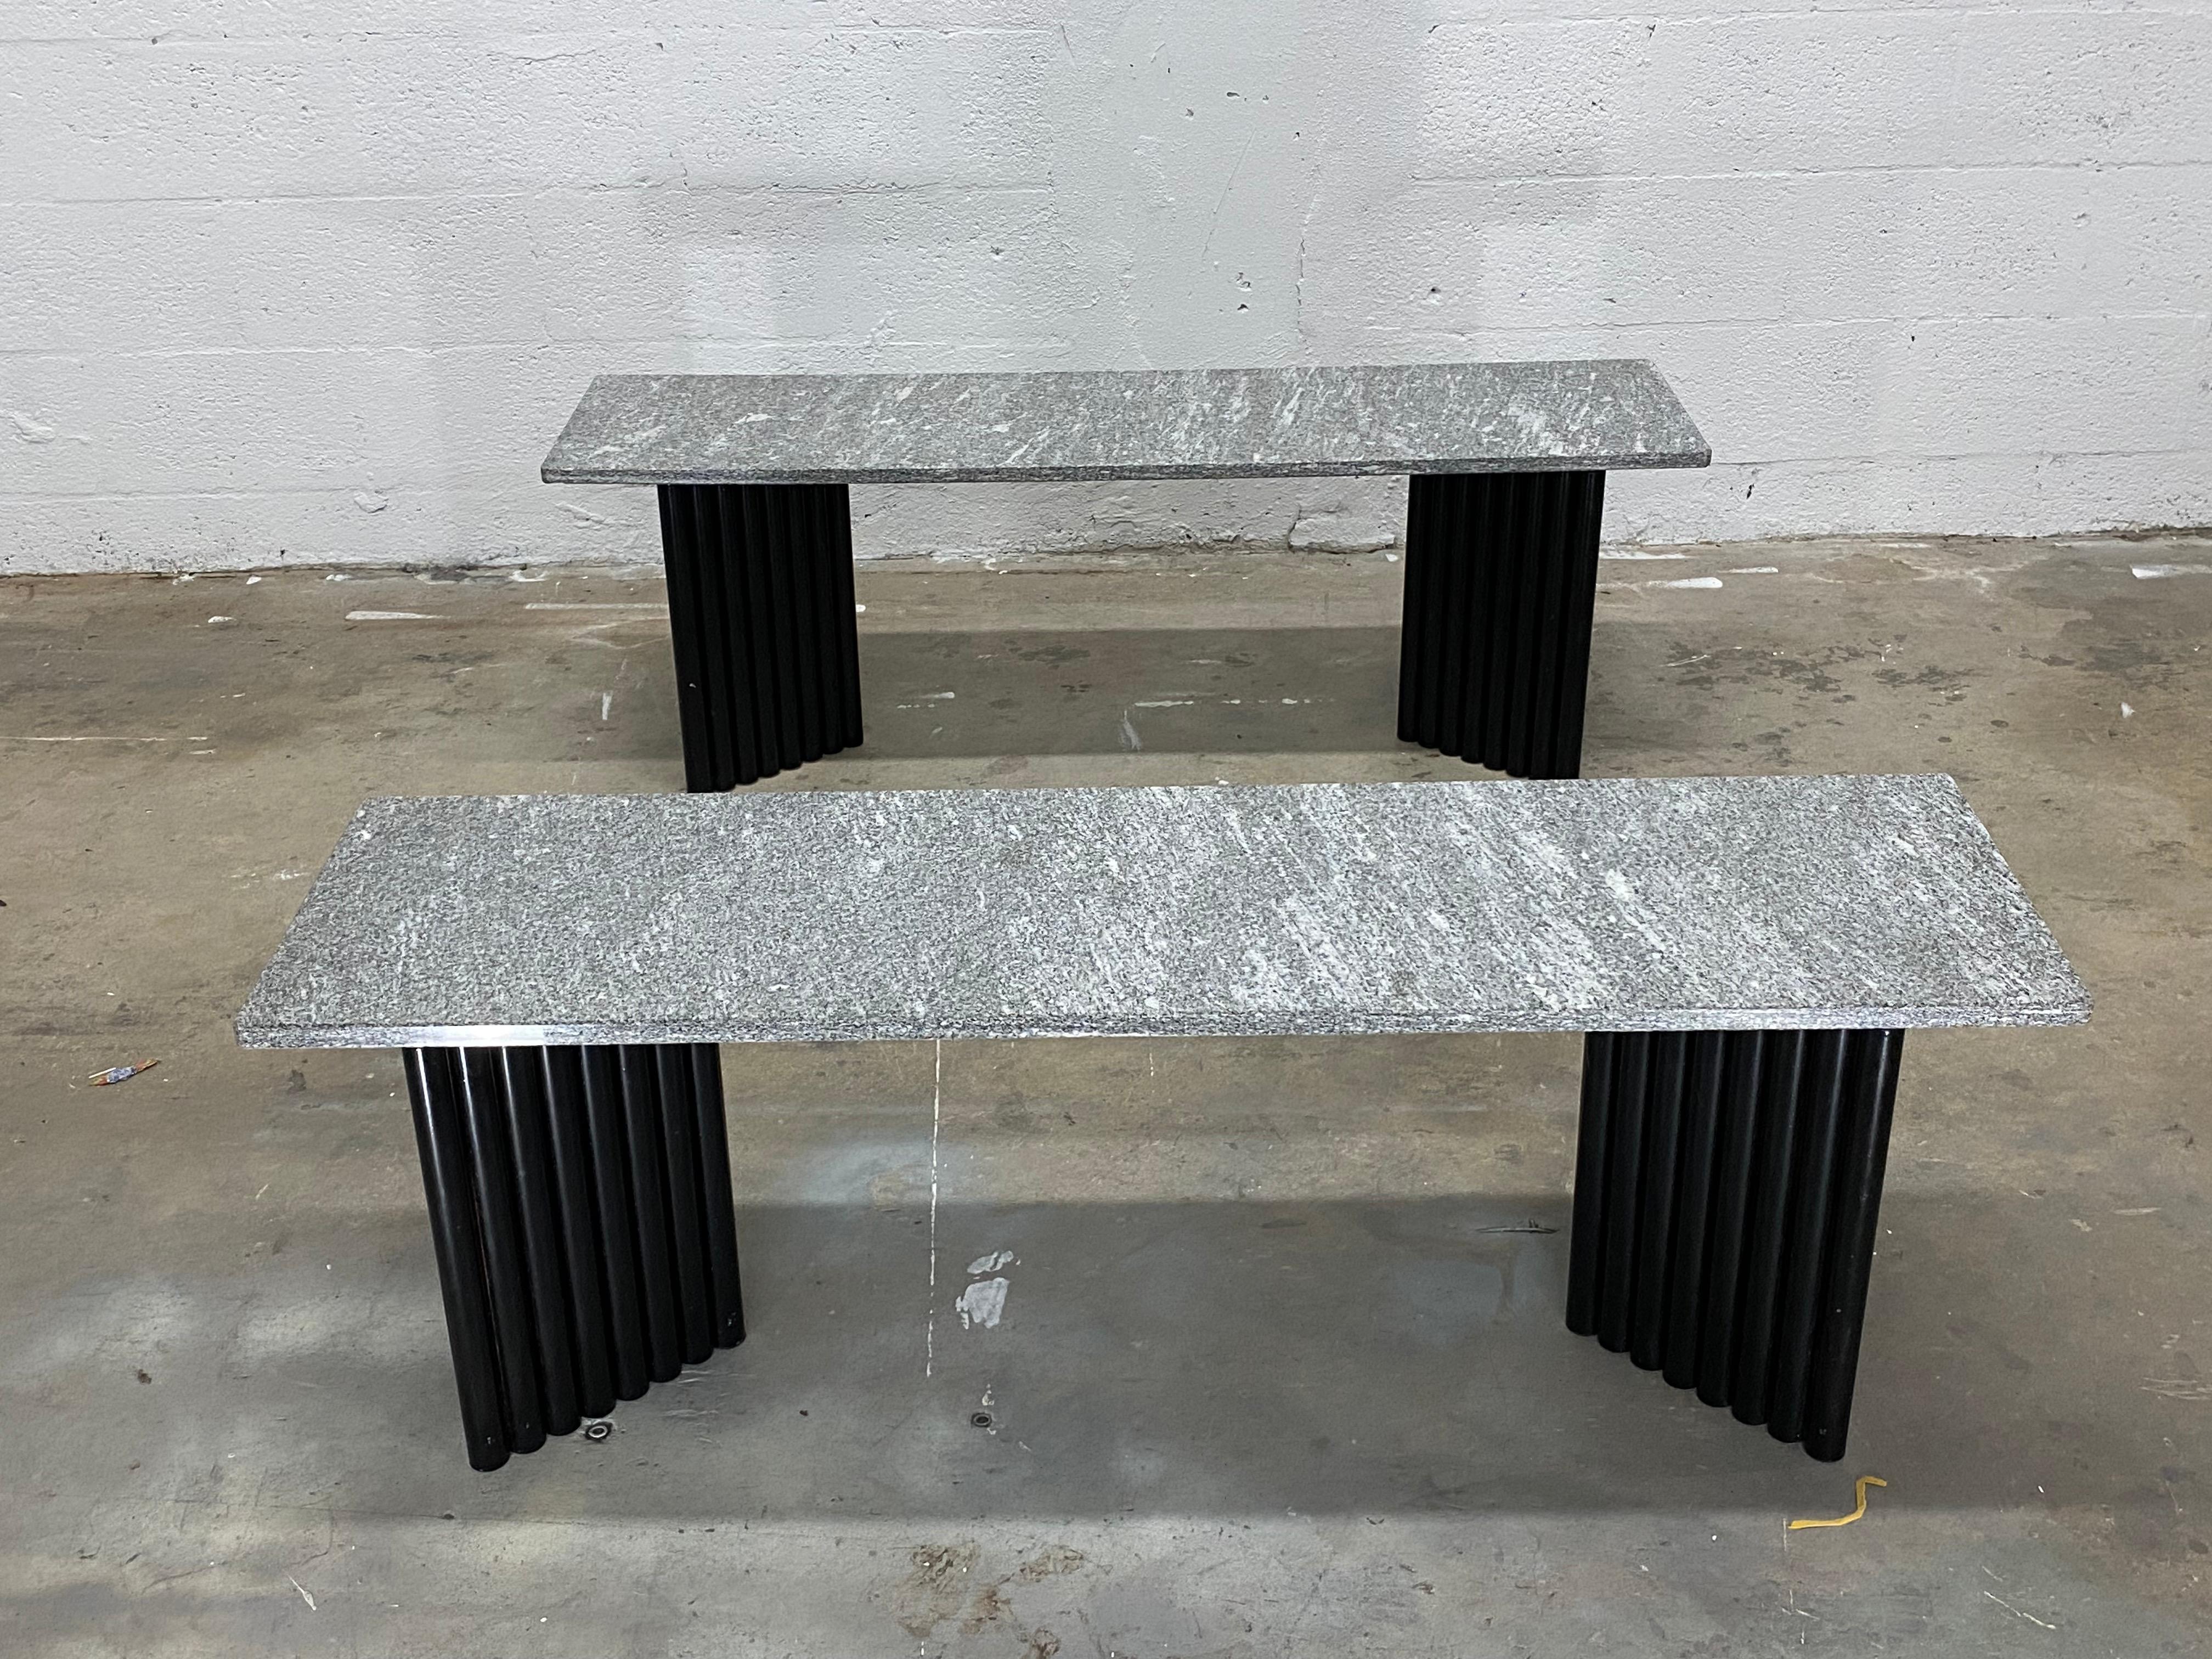 Pair of postmodern black powder-coated V-shaped tubular steel base tables with solid granite marble tops from the 1980s. Can be arranged in a multitude of variations: side tables, coffee tables, or stacking shelves.

Each table measures:
W 13